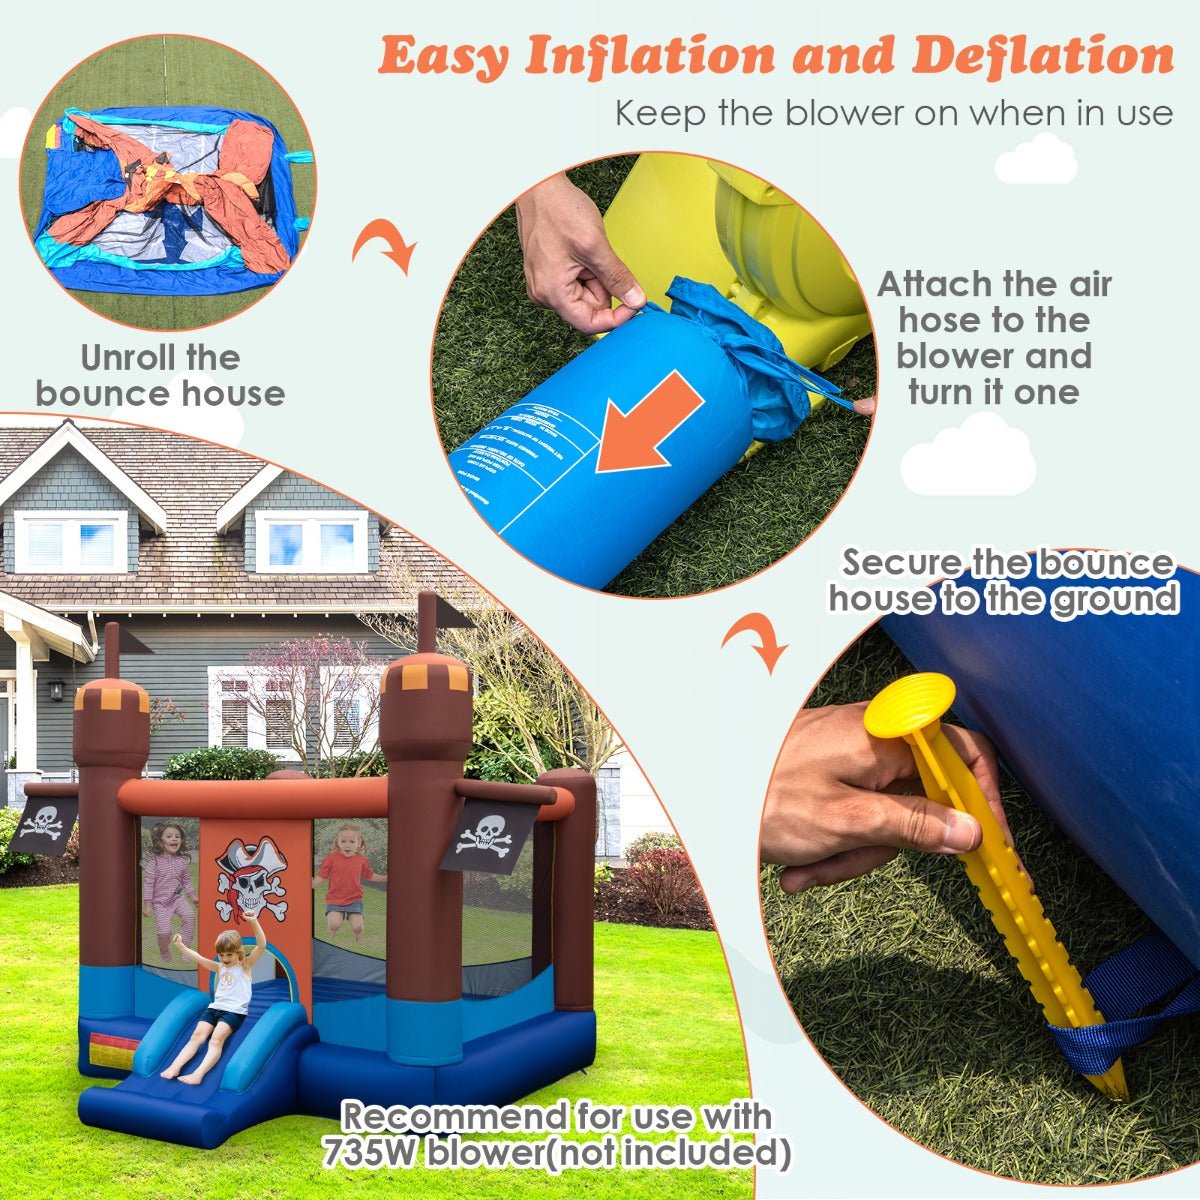 Kids Inflatable Bounce Castle - Active Outdoor Fun with Basketball